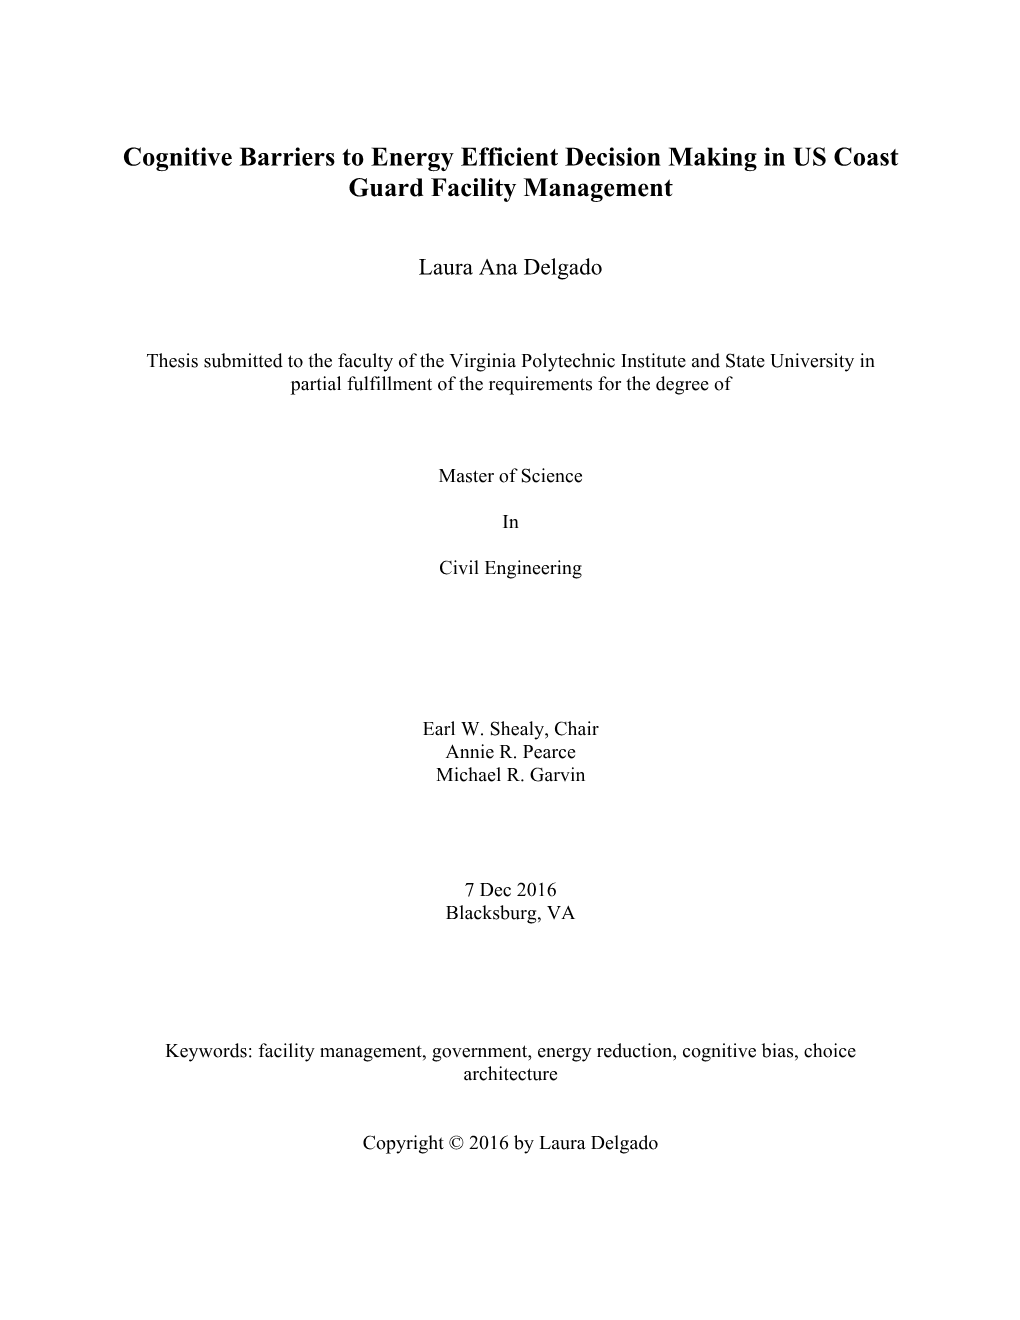 Cognitive Barriers to Energy Efficient Decision Making in US Coast Guard Facility Management